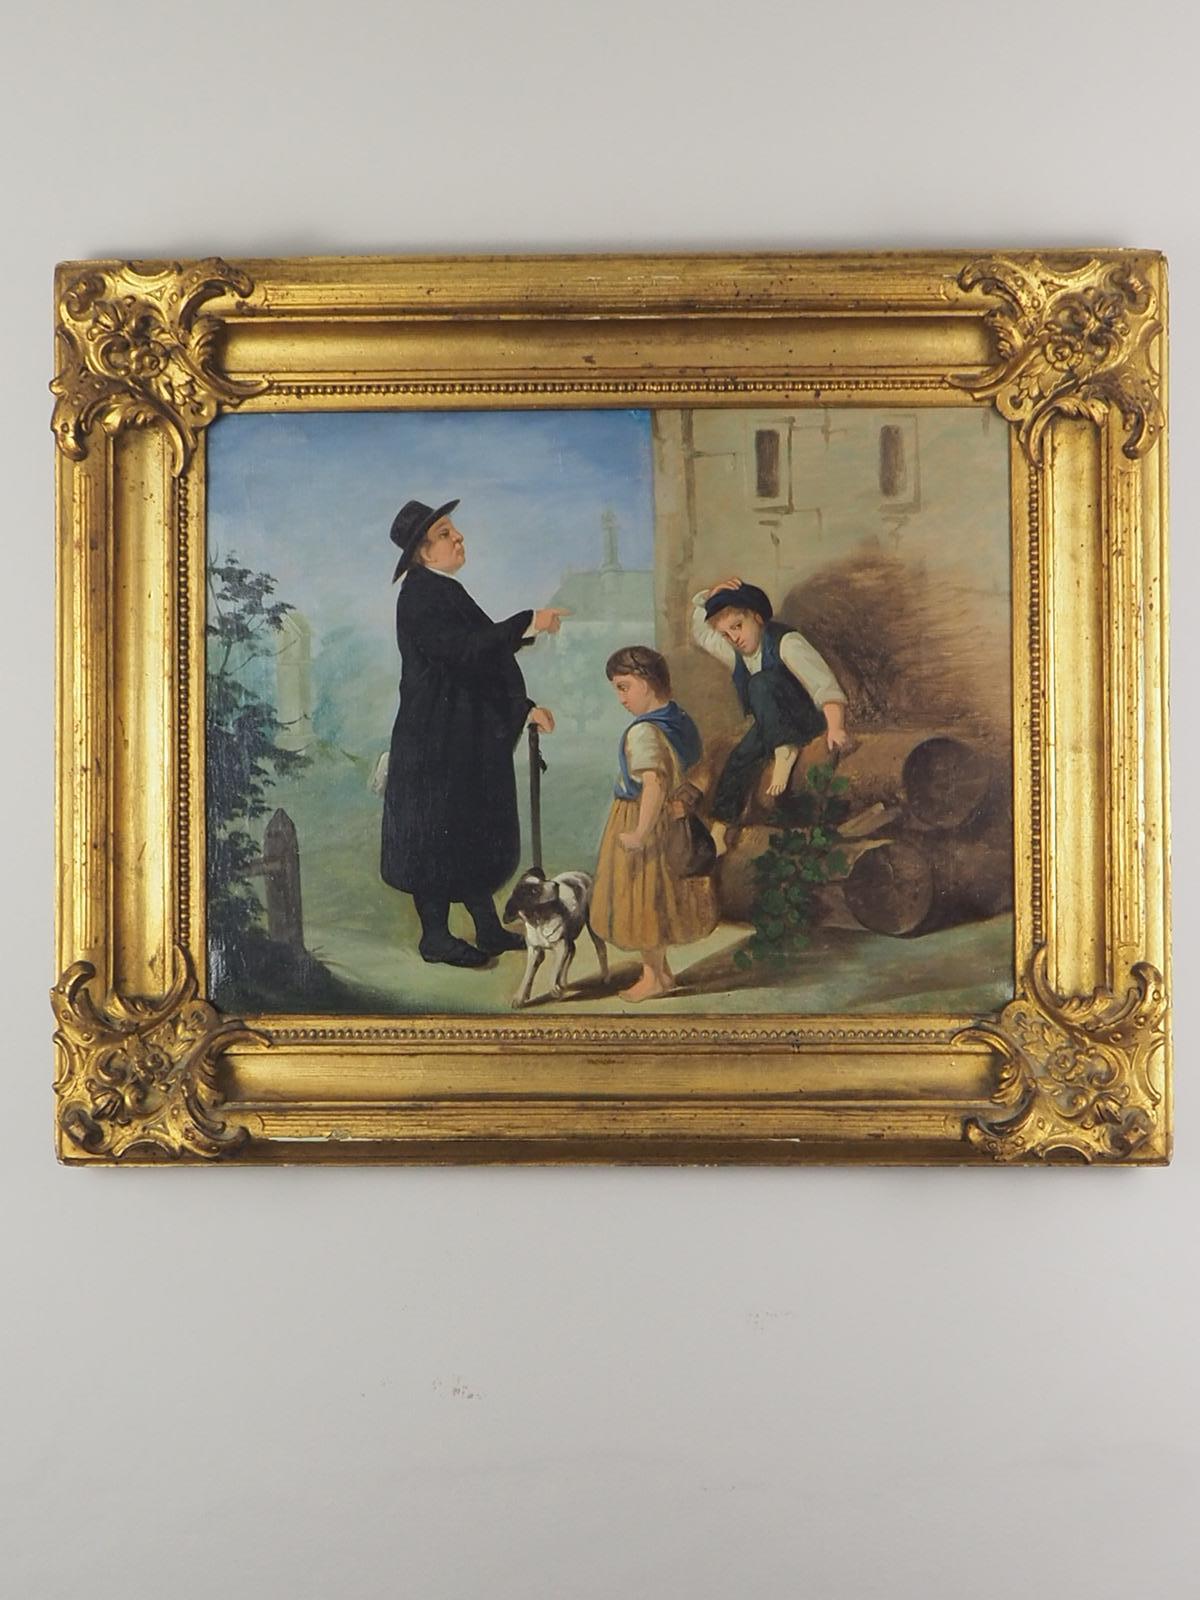 19th Century Oil Painting “Lessons to be Learnt”

Signed by “K 87” (1887)

Framed in a highly decorative classical frame

Continental scene depicting a stern schoolmaster lambasting two pupils, with a rather anxious dog completing this delightful